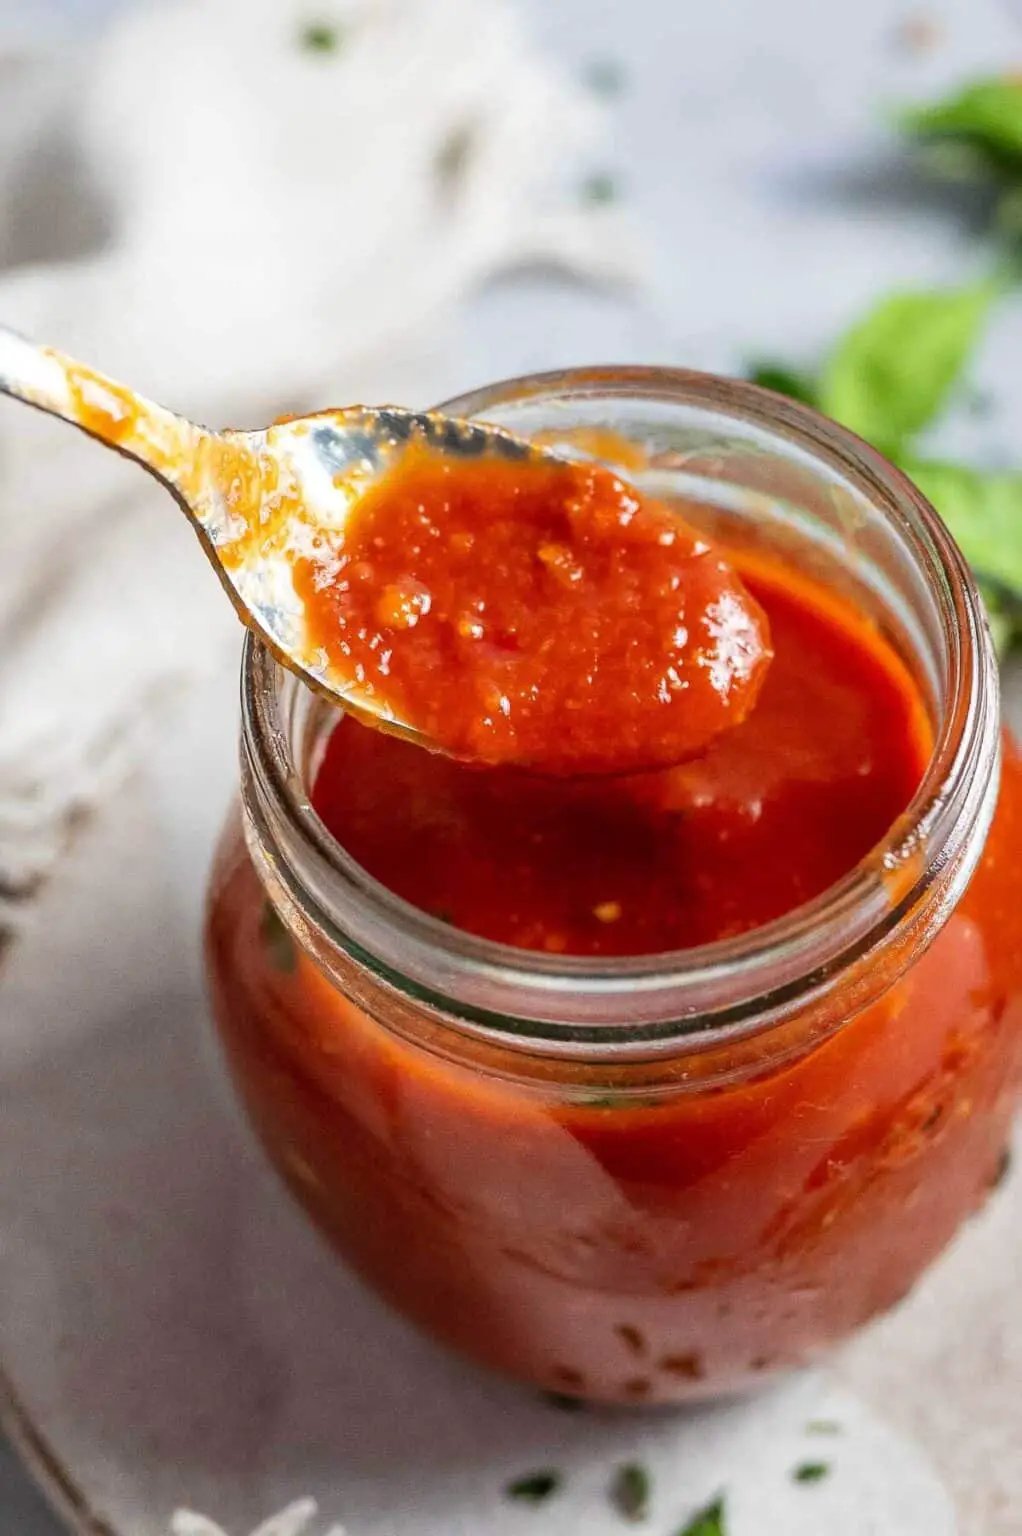 Sugar Free Sweet and Sour Sauce Recipe